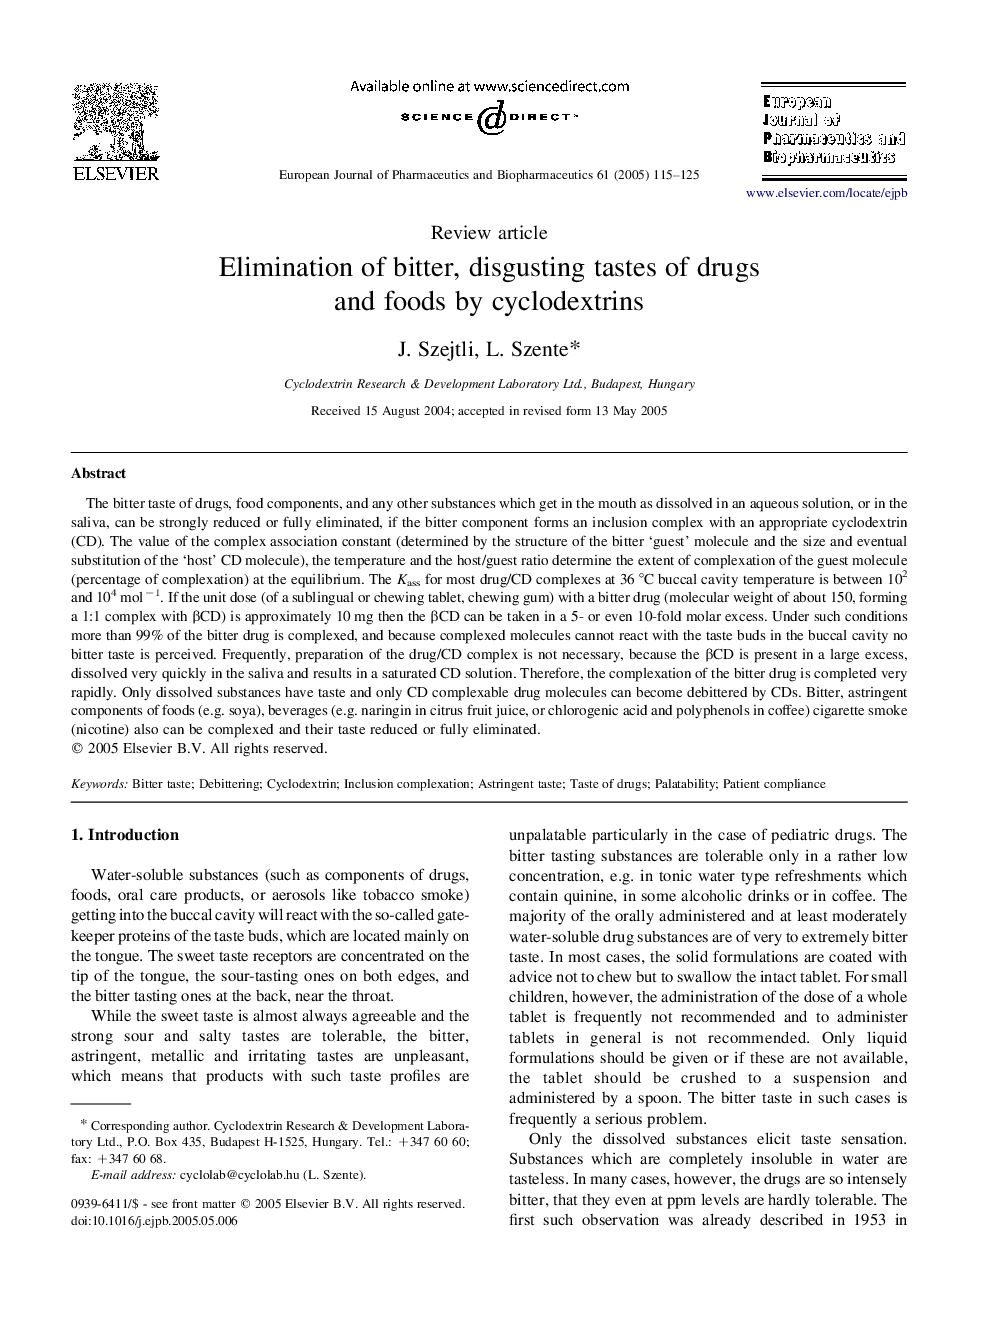 Elimination of bitter, disgusting tastes of drugs and foods by cyclodextrins